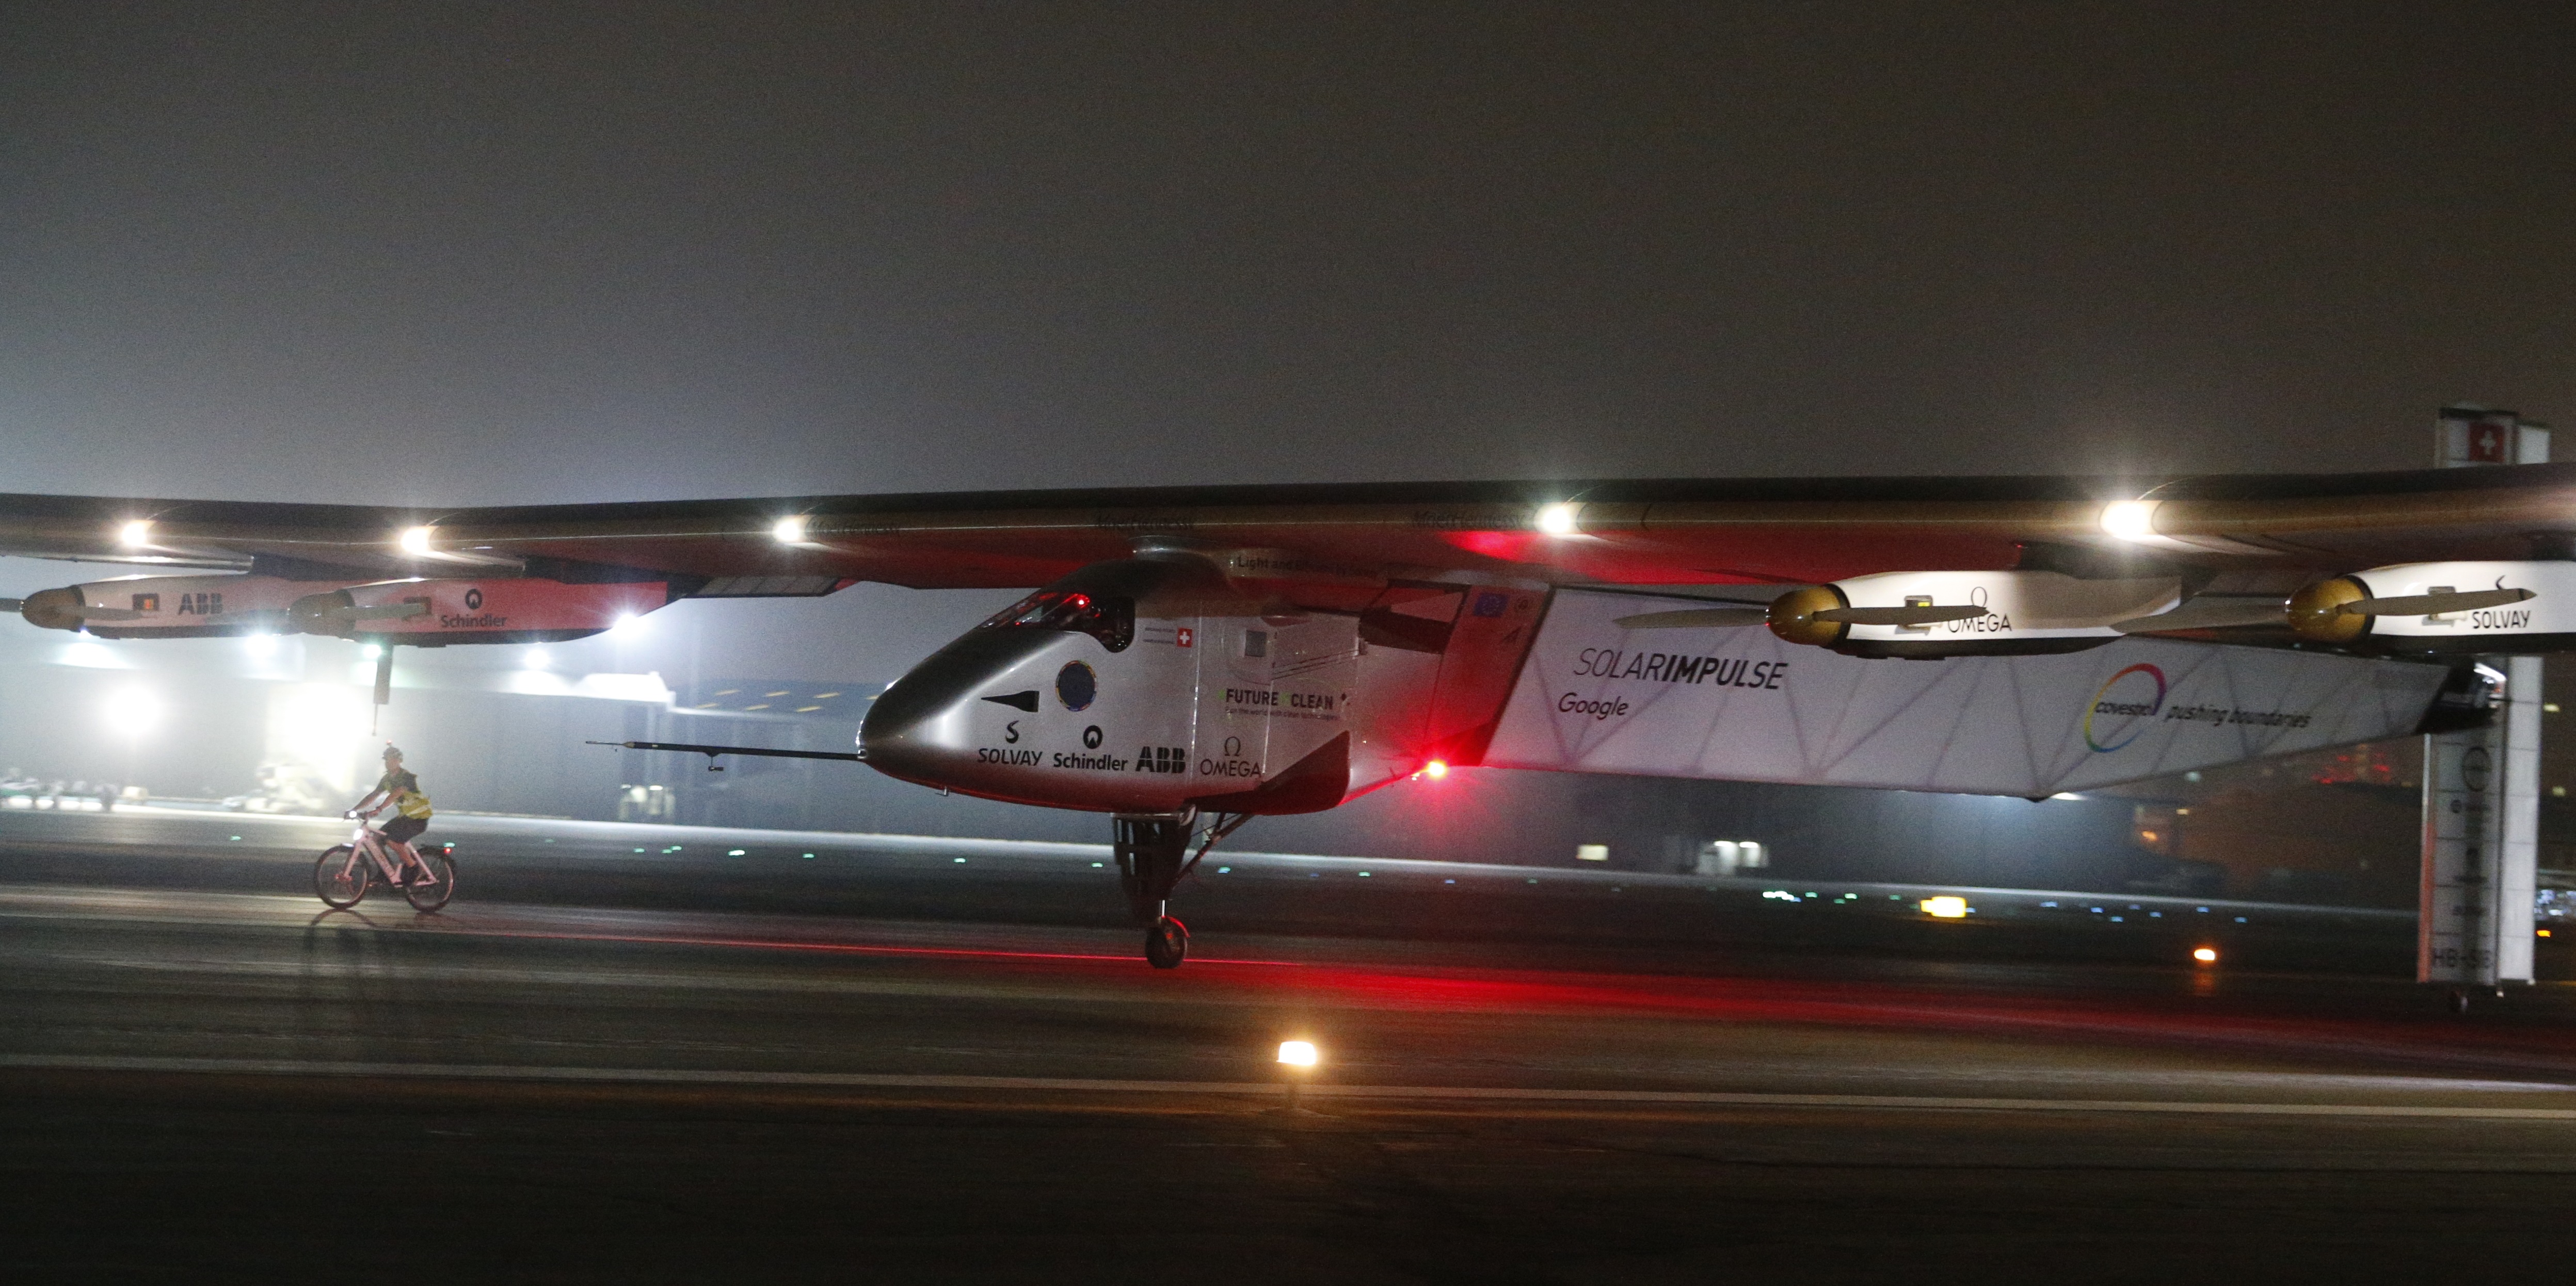 Solar Impulse 2, the solar powered plane, arrives at Al Batin Airport in Abu Dabi to complete its world tour flight on July 26, 2016 in the United Arab Emirates. Solar Impulse 2 landed in the UAE early on Tuesday, July 26, 2016, completing its epic journey to become the first sun-powered airplane to circle the globe without a drop of fuel. / AFP PHOTO / KARIM SAHIB